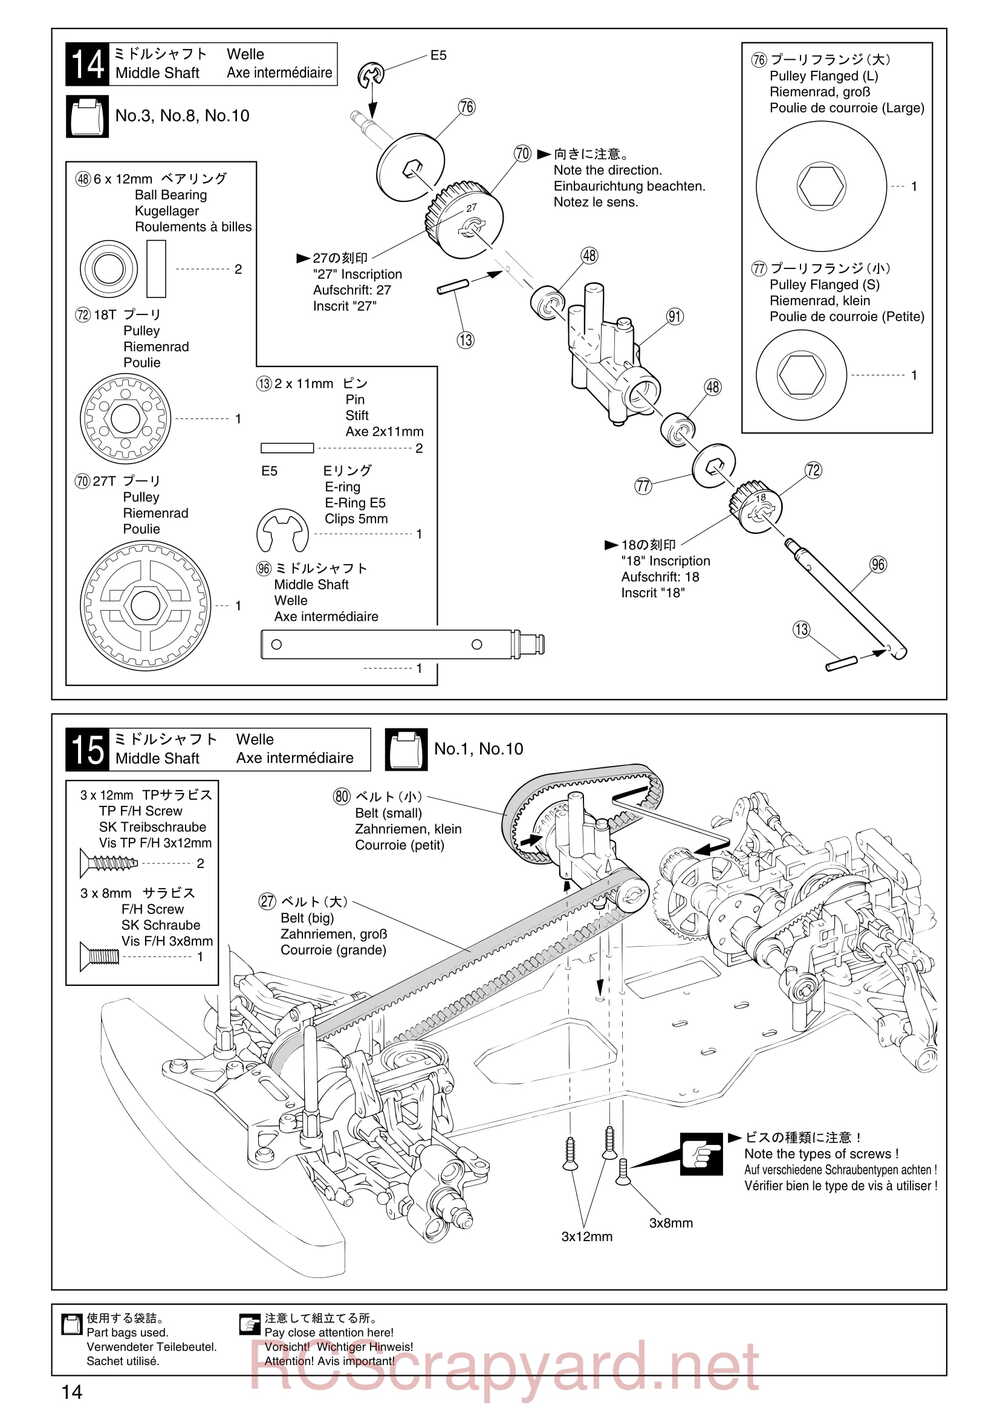 Kyosho - 31122 - V-One S2 - Manual - Page 14